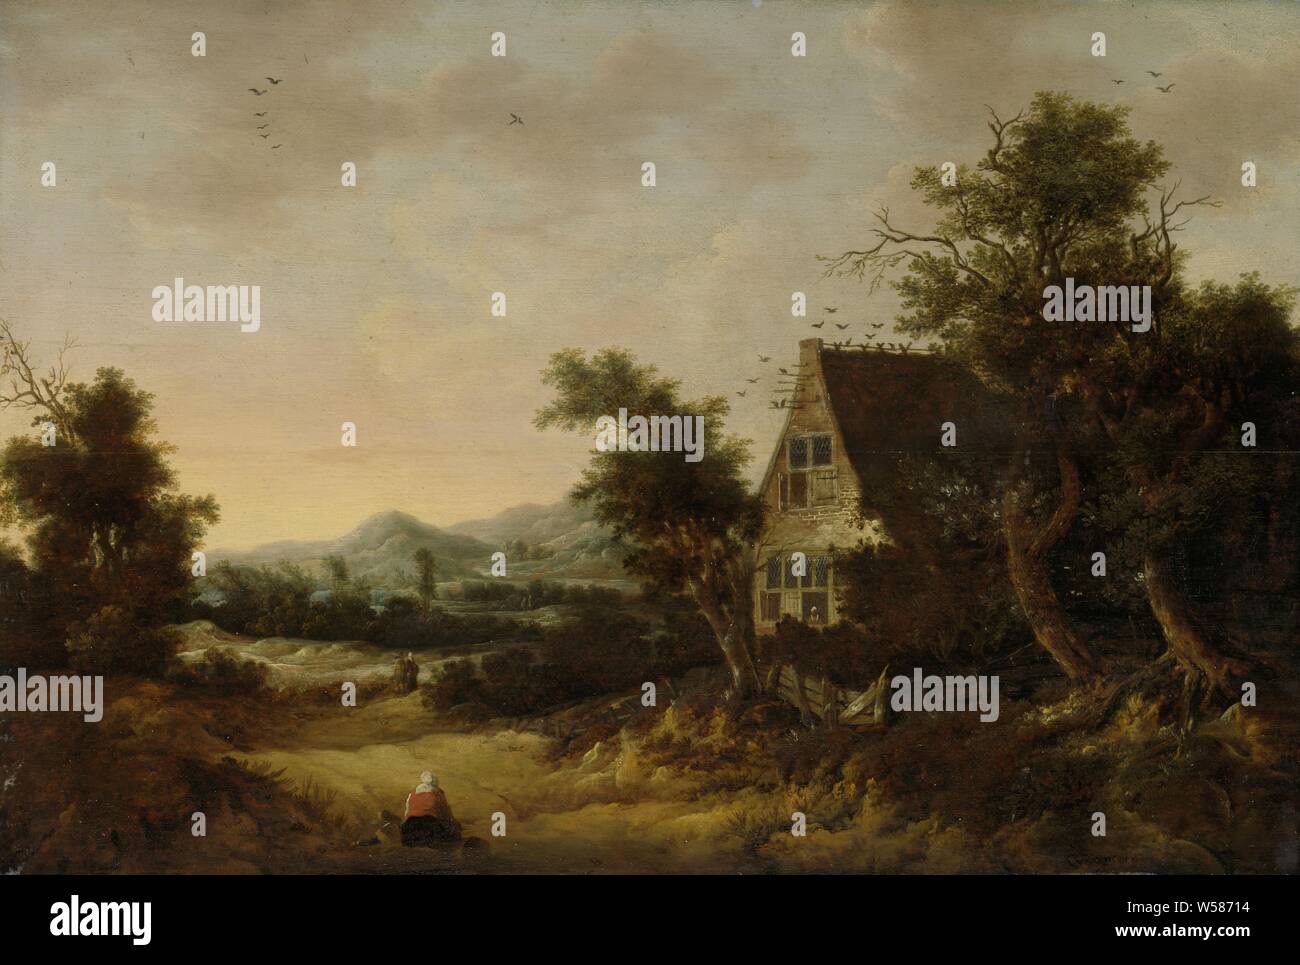 Hilly Landscape with Peasant Cottage, Hillside landscape with a farmhouse on the right nestled among trees. There is a dirt road in front of the house, with some passers-by resting in the foreground., Cornelis van Zwieten, 1653, panel, oil paint (paint), h 41.5 cm × w 60 cm d 4.5 cm Stock Photo